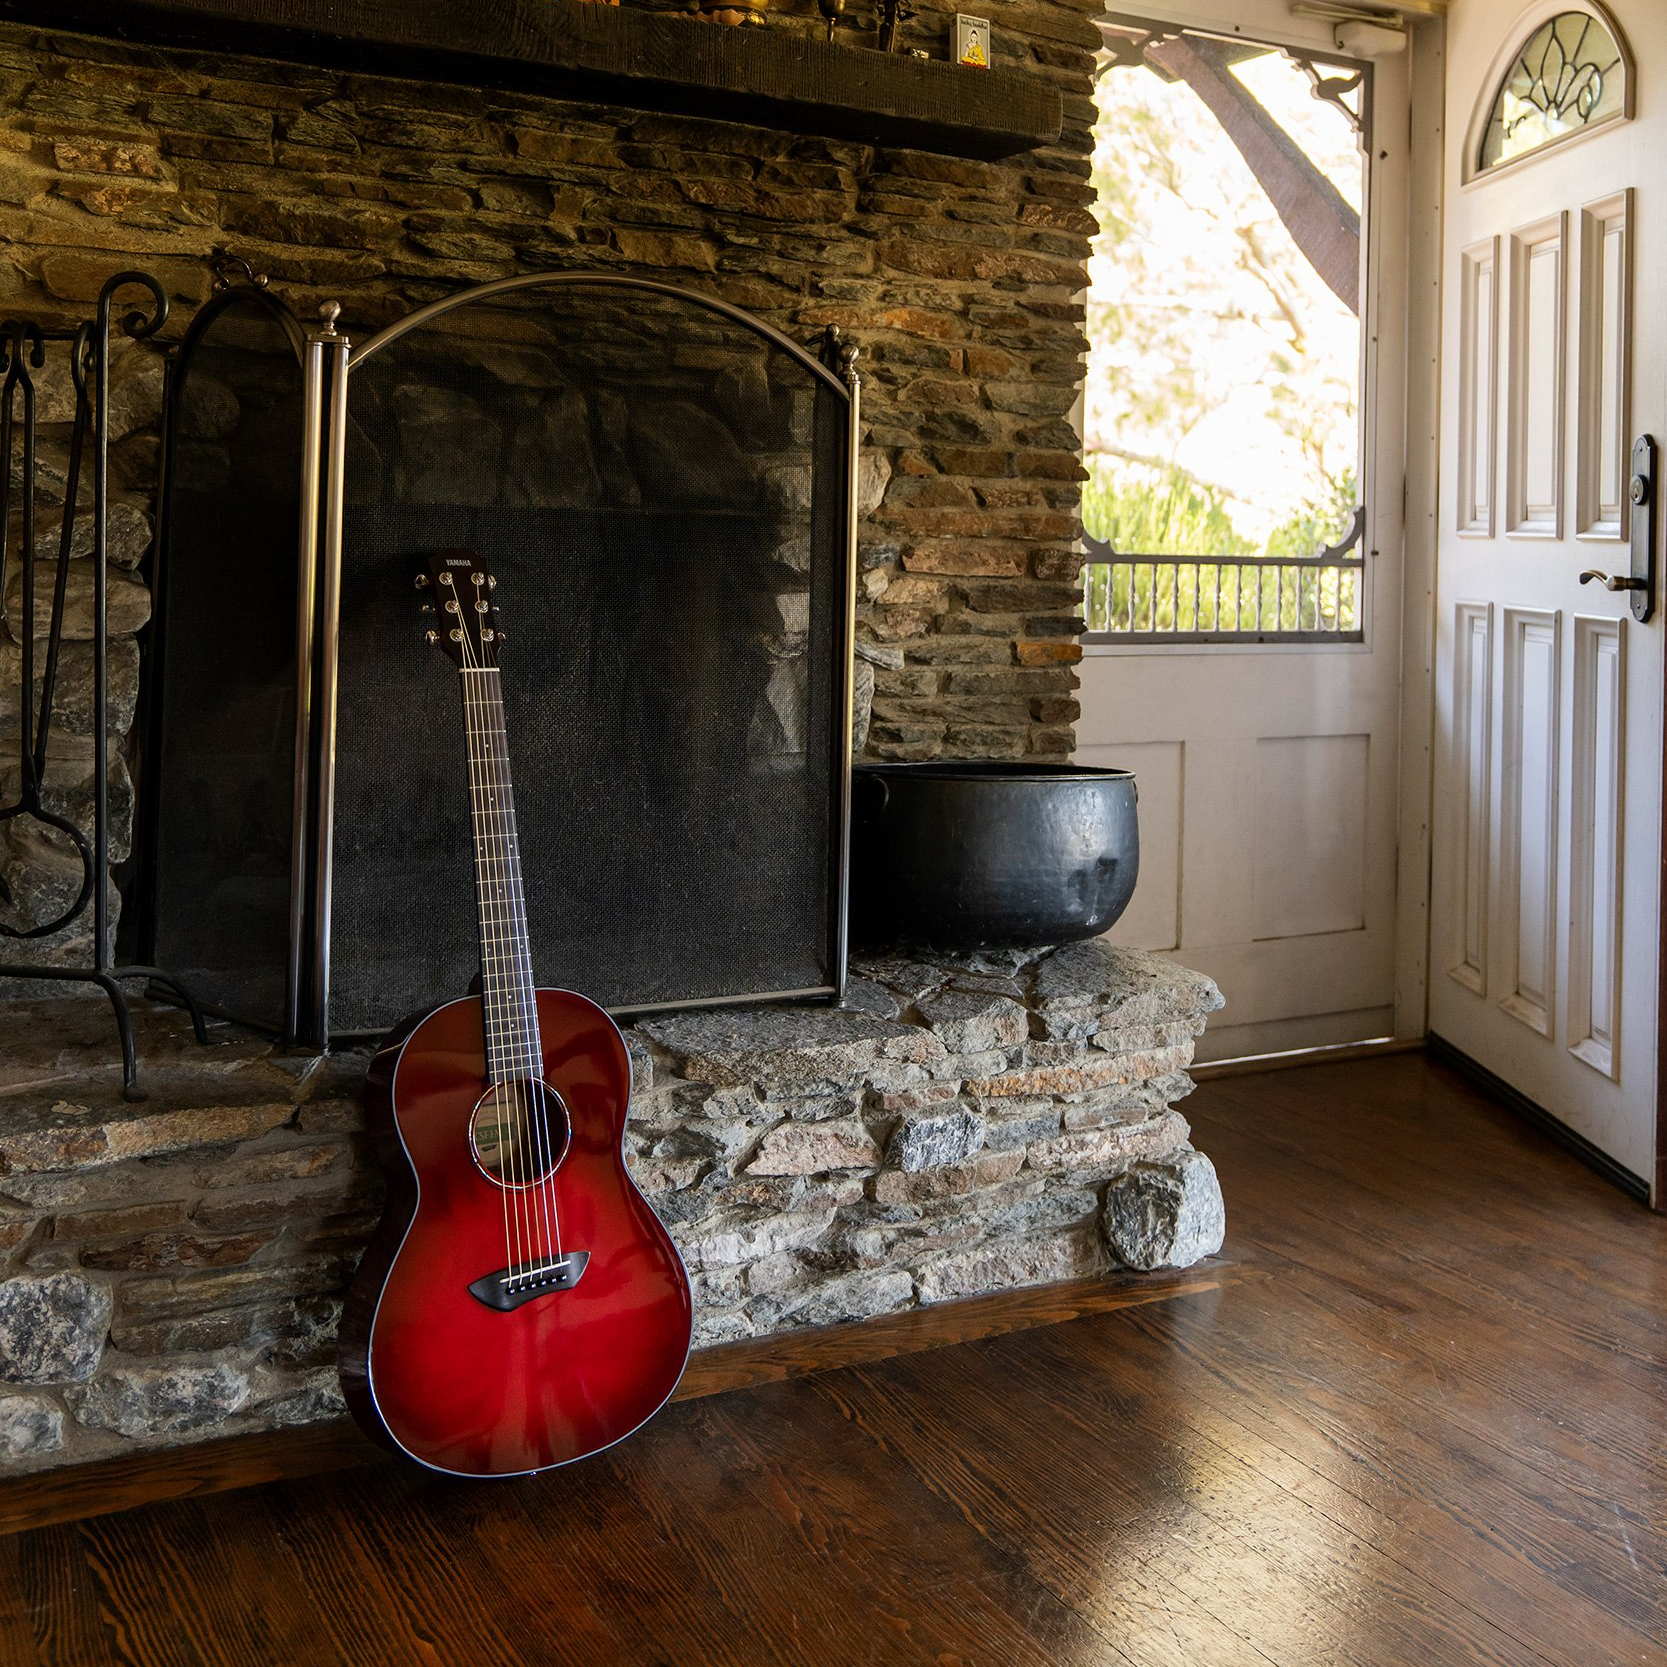 Guitar standing up leaning against a fireplace.